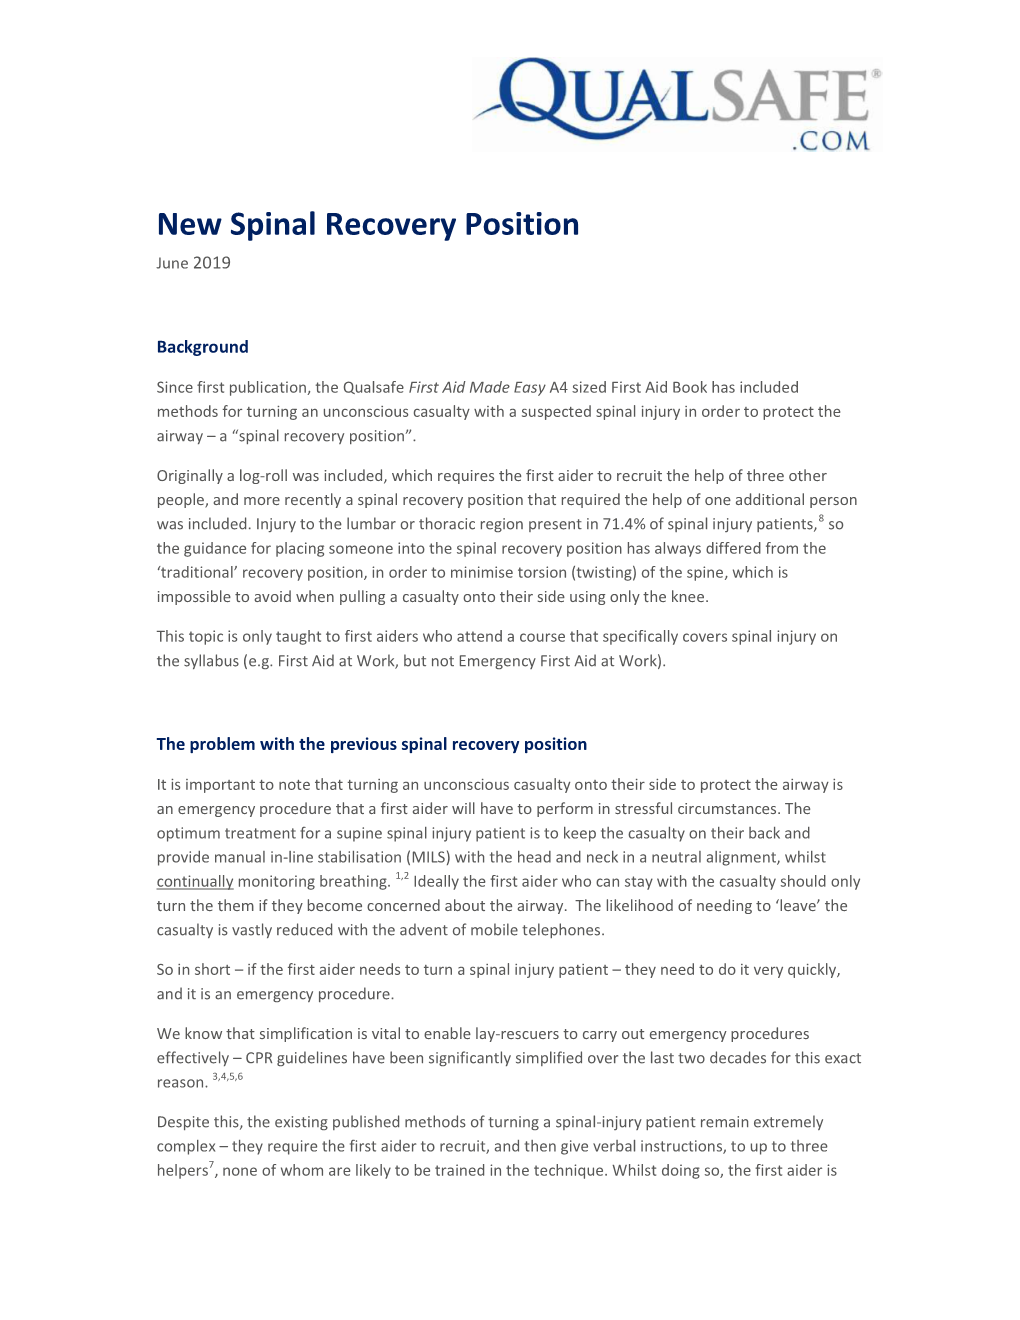 New Spinal Recovery Position June 2019